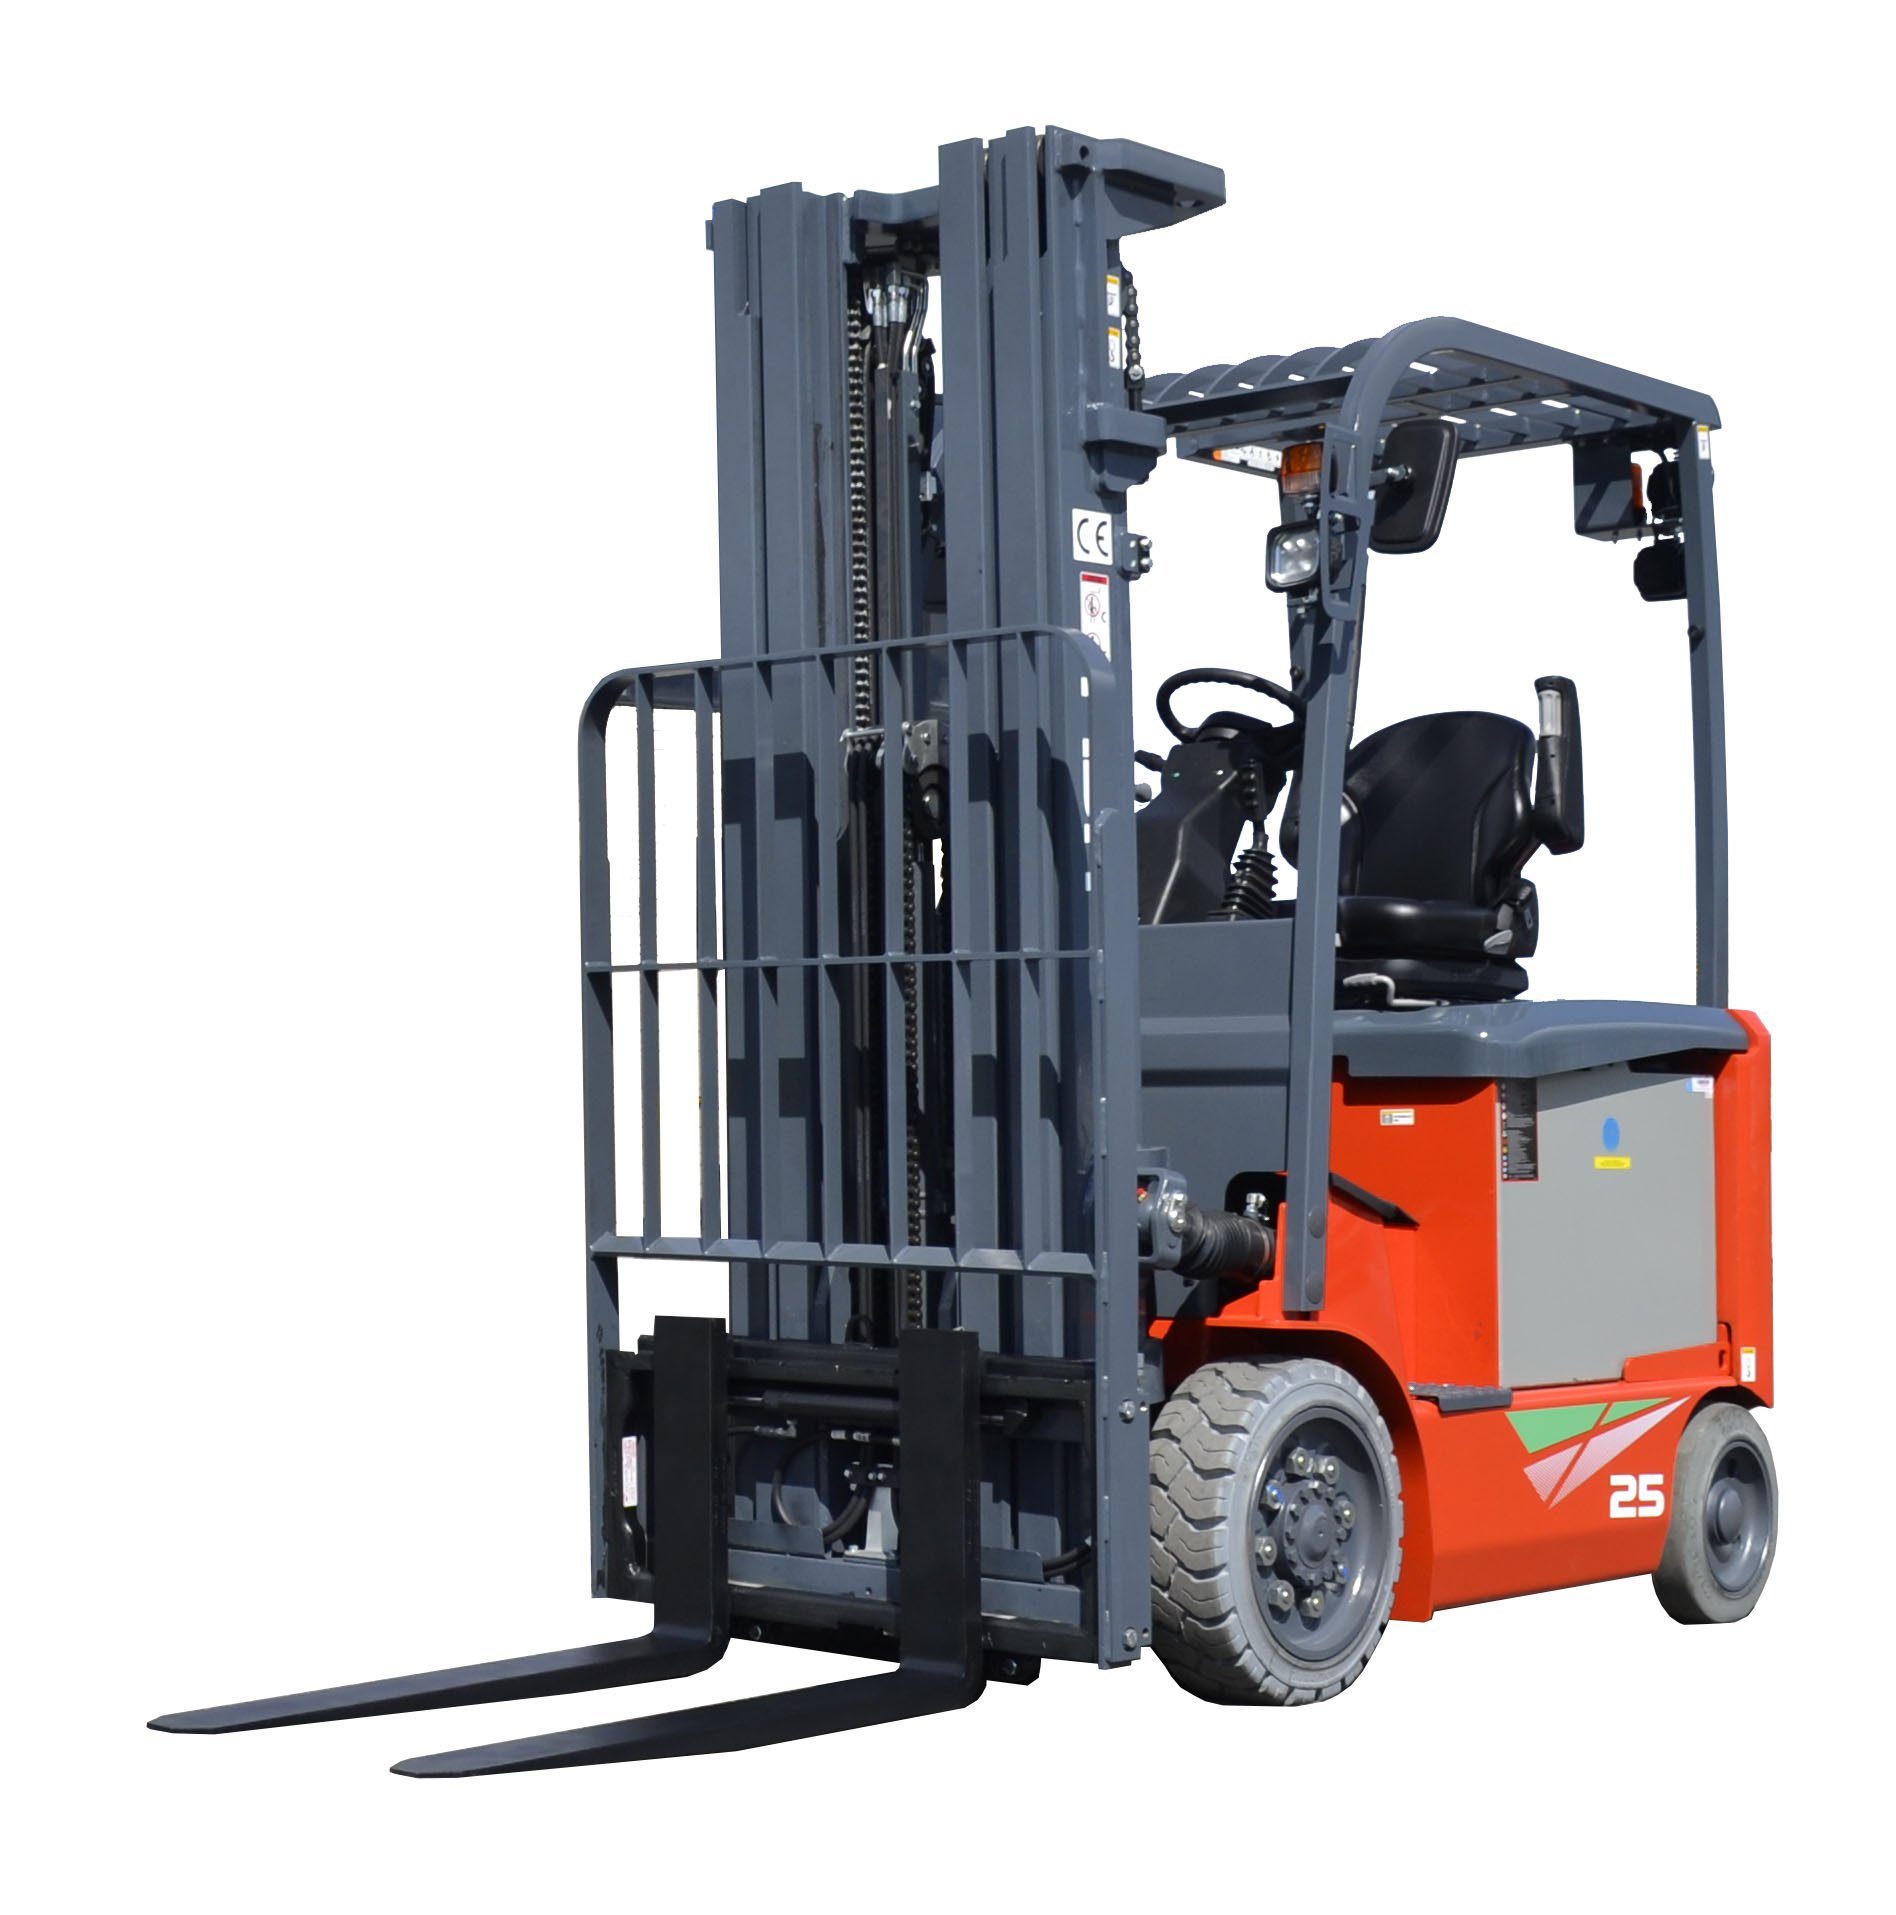 Heli Lithium-Ion Battery Forklifts are now available